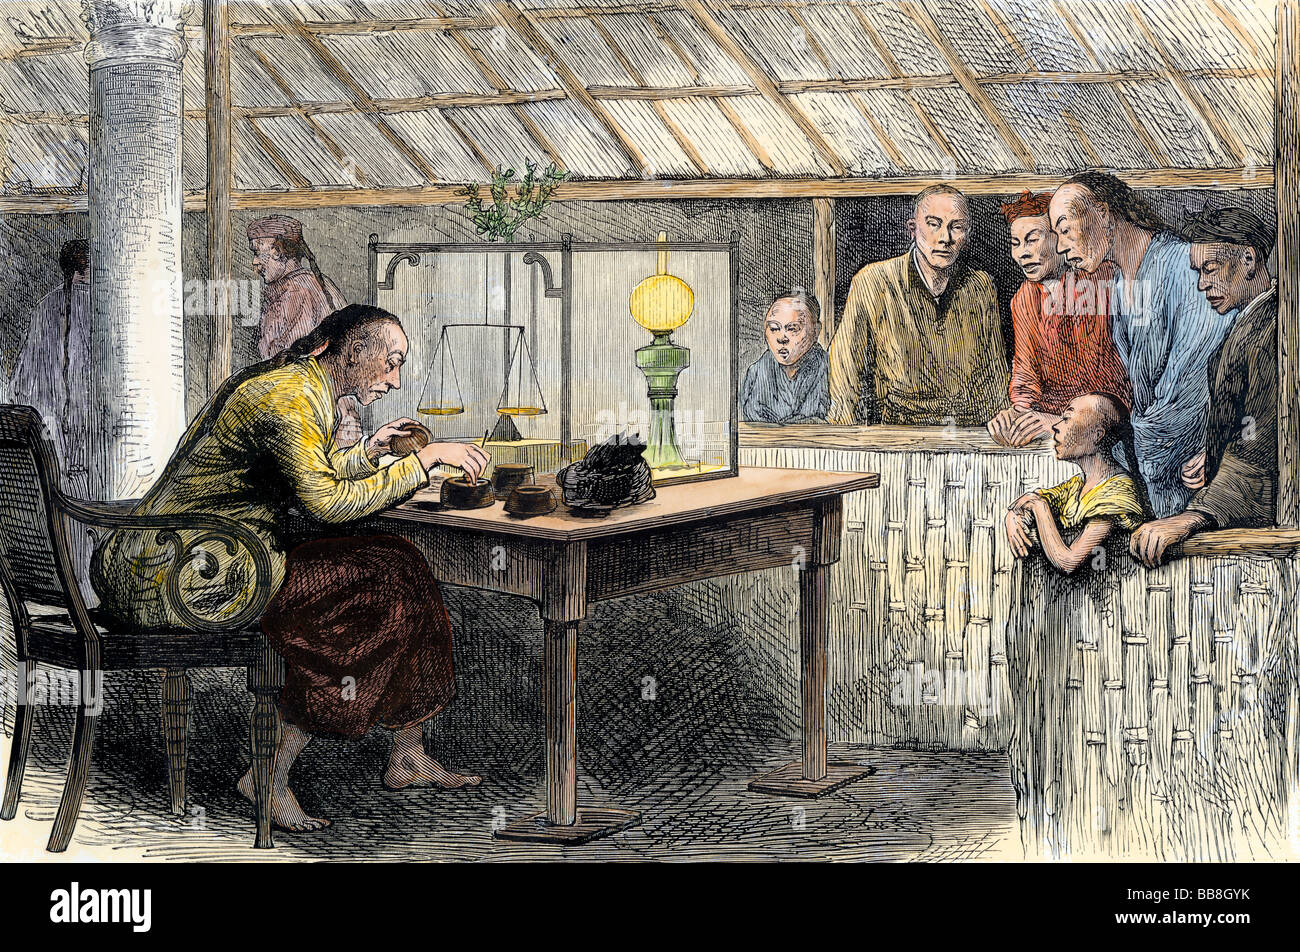 Chinese merchant weighing opium 1880s. Hand-colored halftone of an illustration Stock Photo